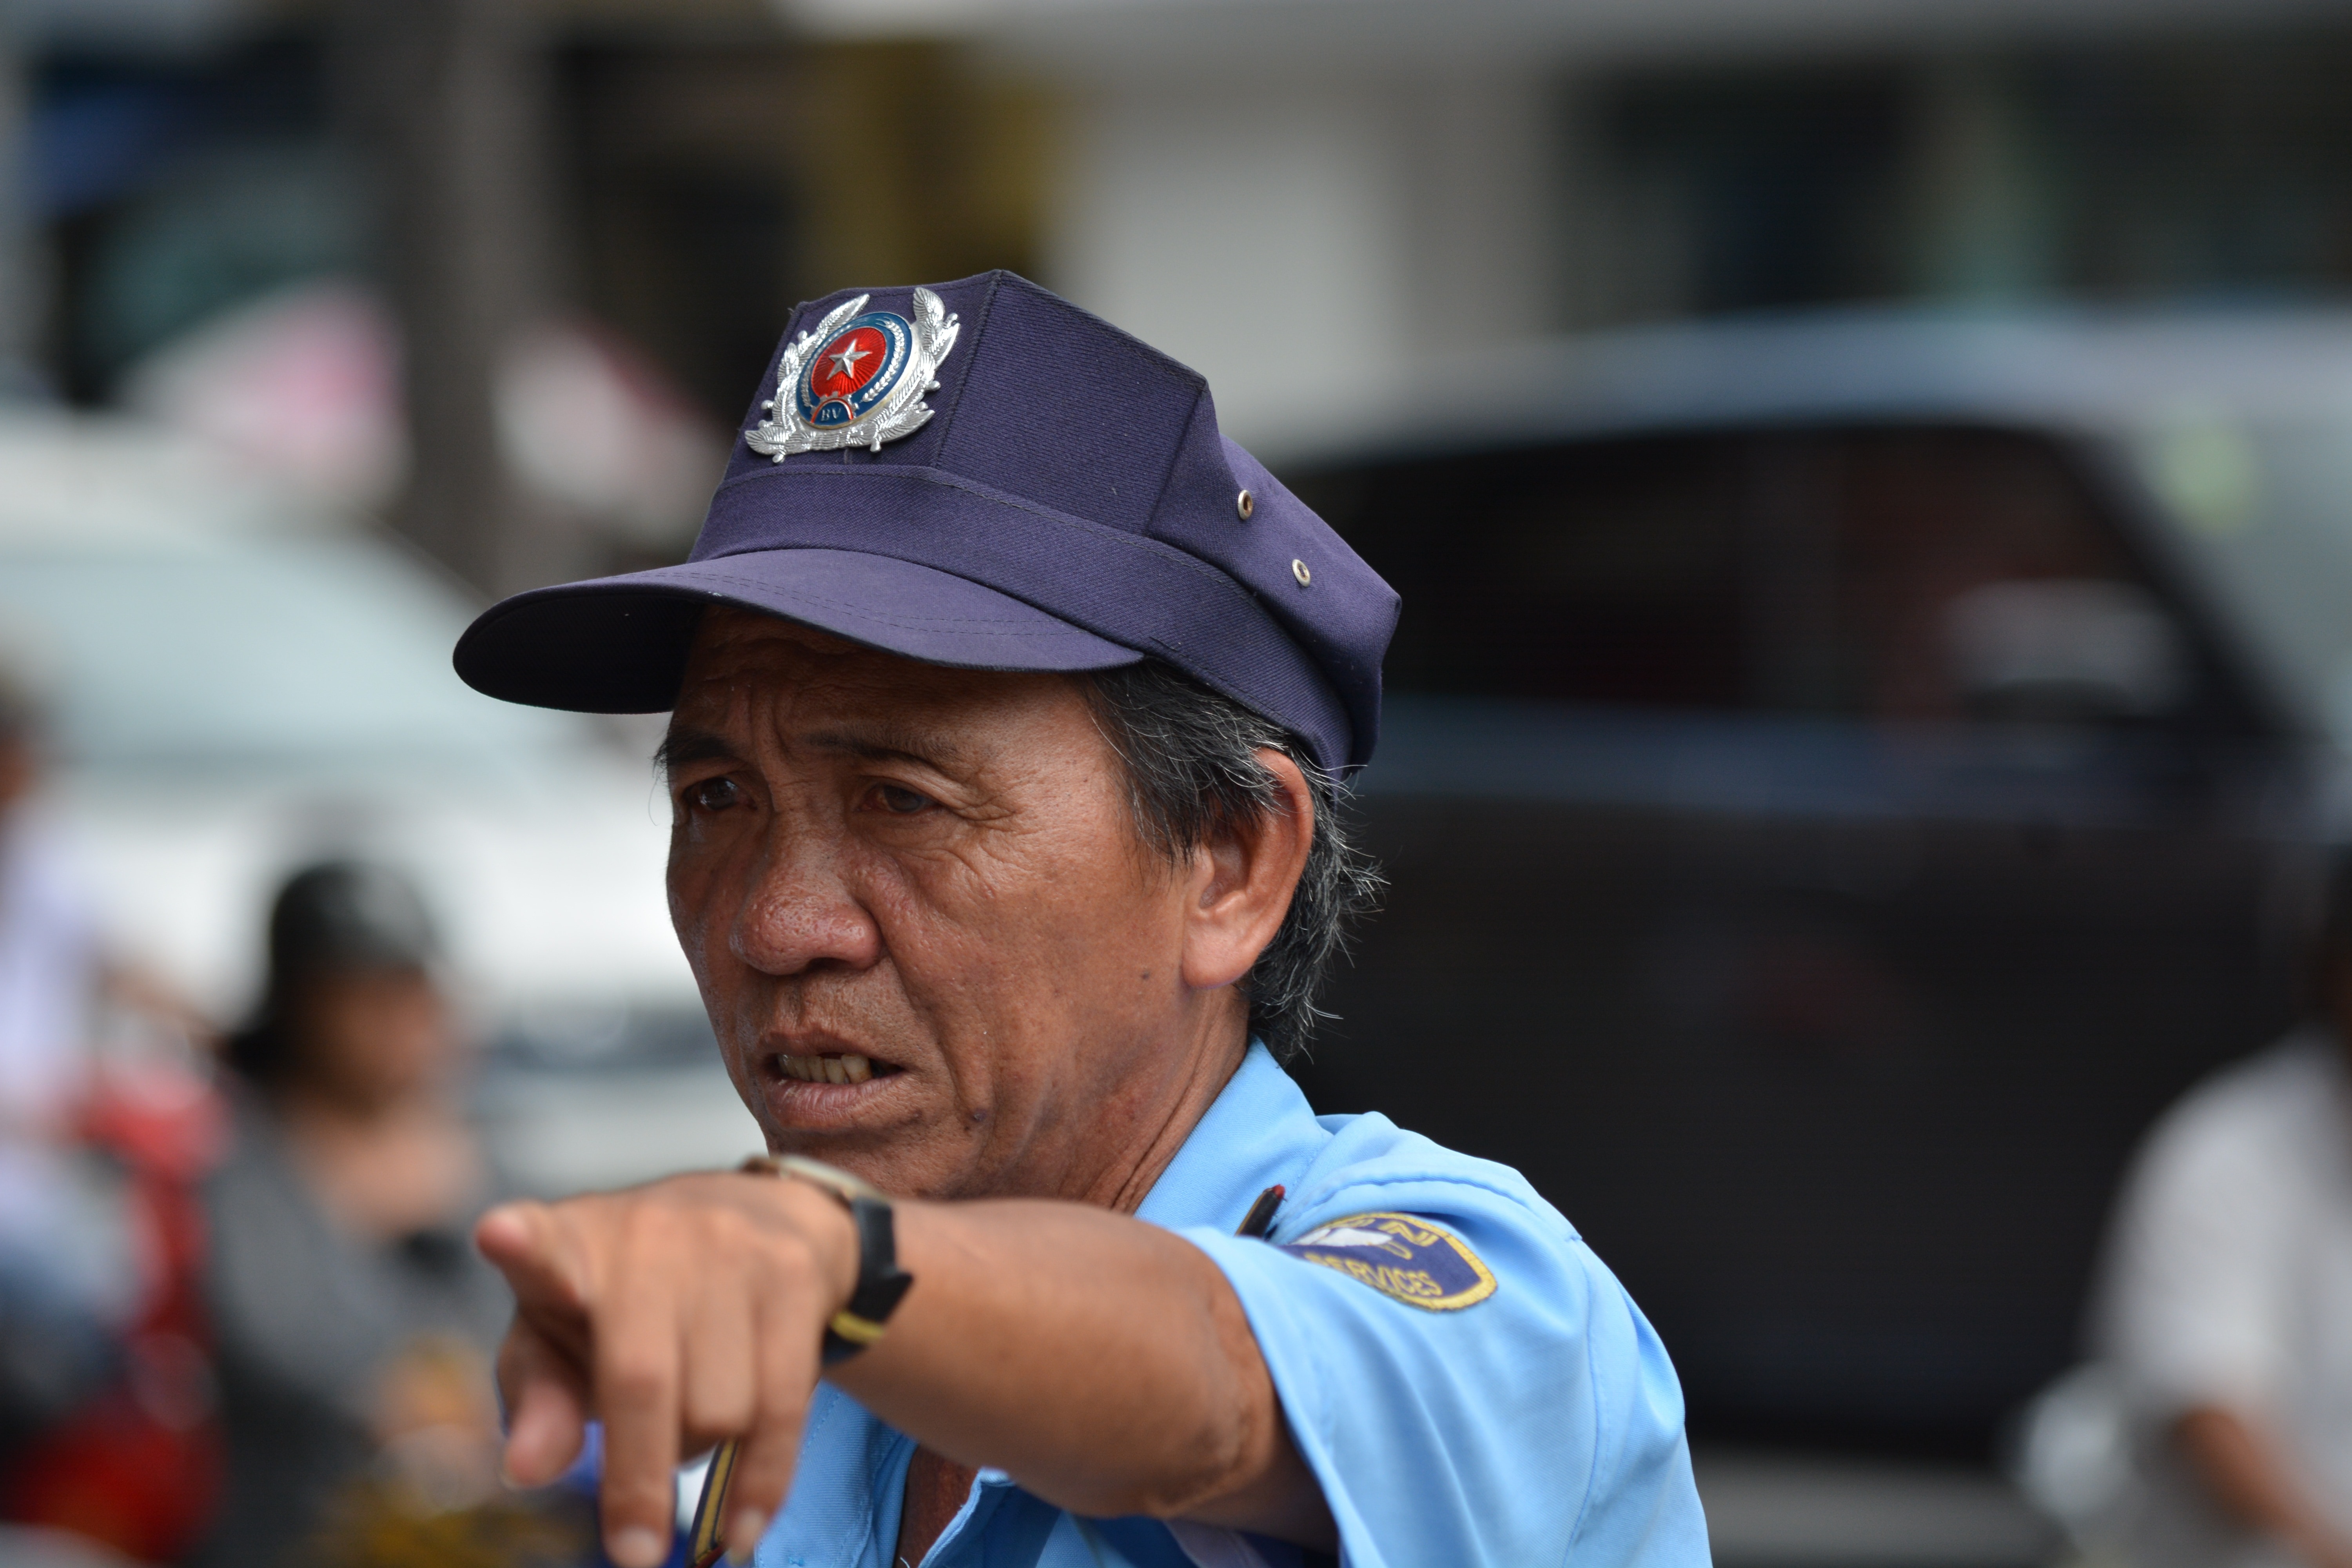 close up photo of person wearing police uniform